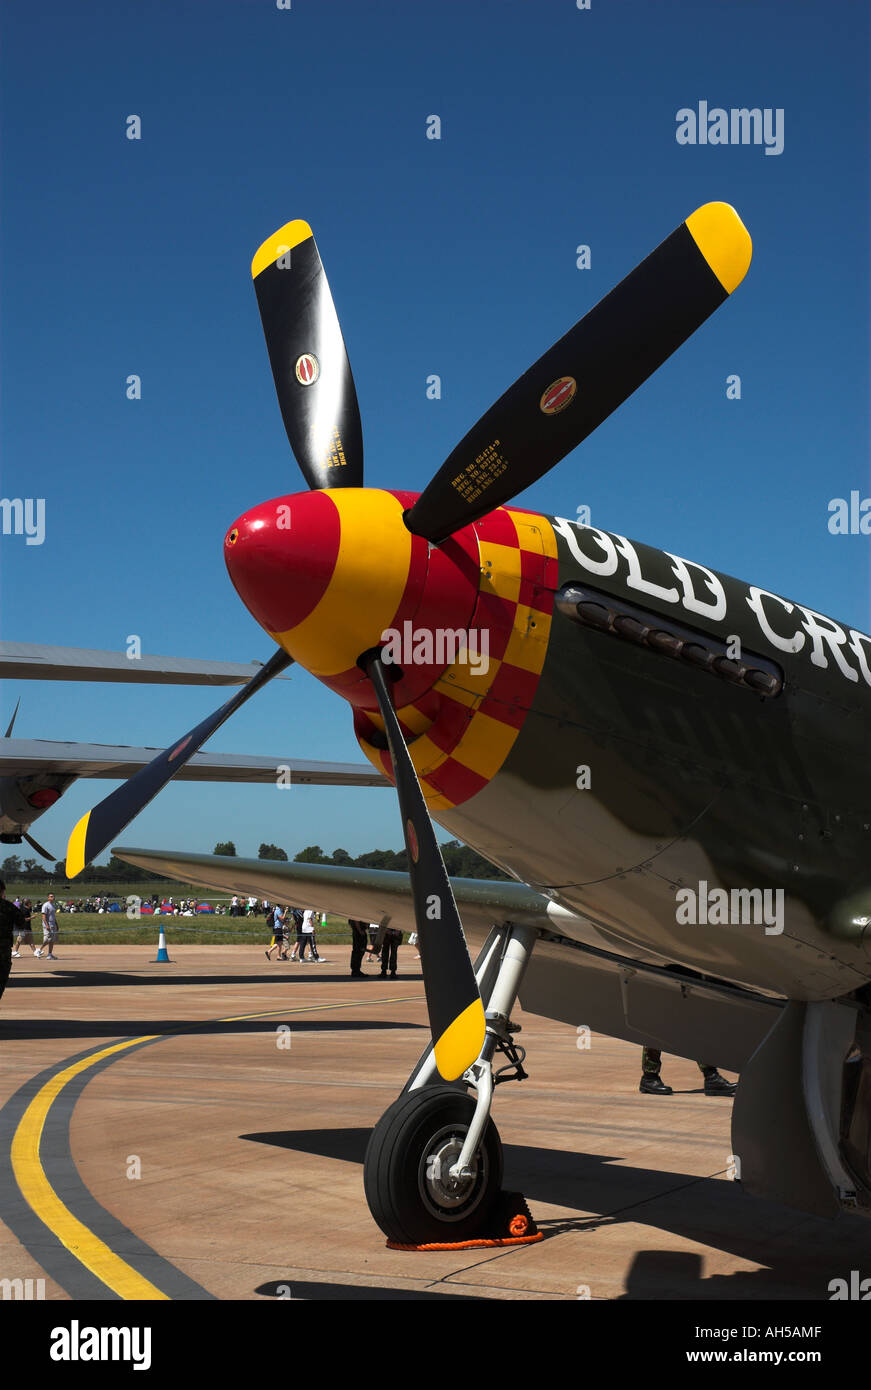 P51 Mustang 'Chasse' Old Crow au Royal International Air Tattoo, Fairford, Angleterre Banque D'Images